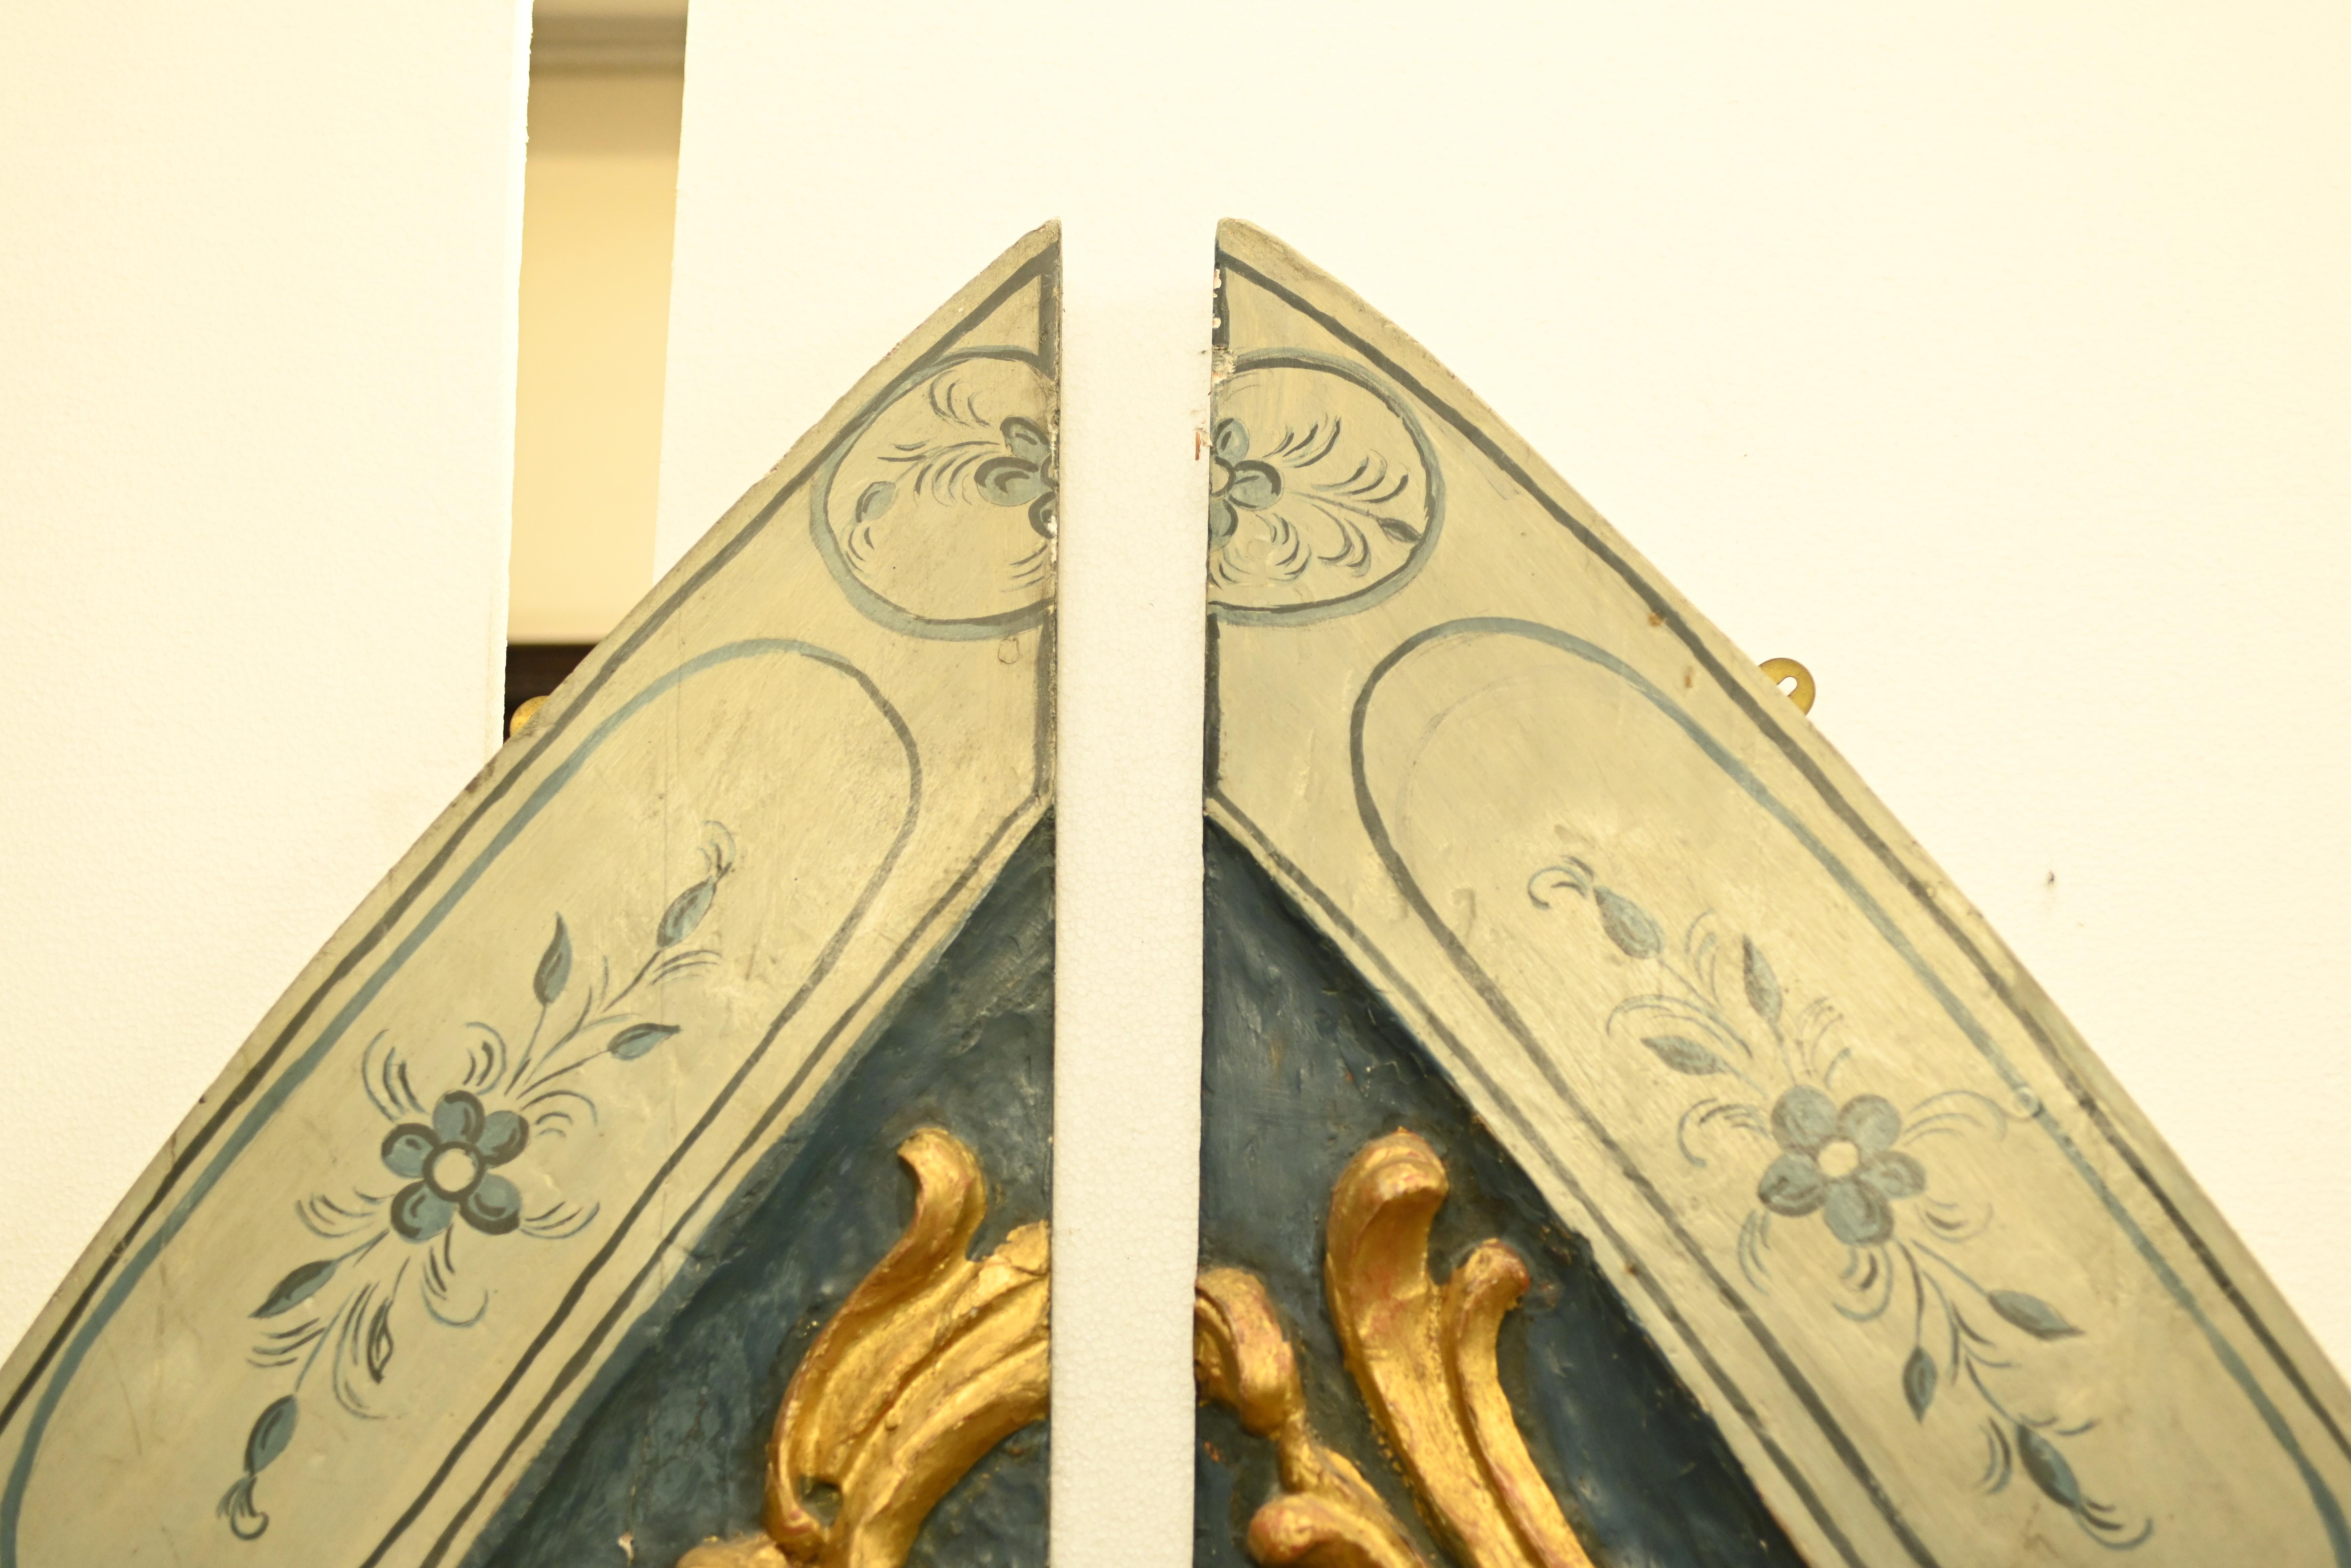 Pair of large decorative doors/window shutters in style of William Morris
Very on trend could be used as doors again or as a decorative feature
Circa 1900 on this pair of doors
Love the interplay between the colours - blues and greys and gilt